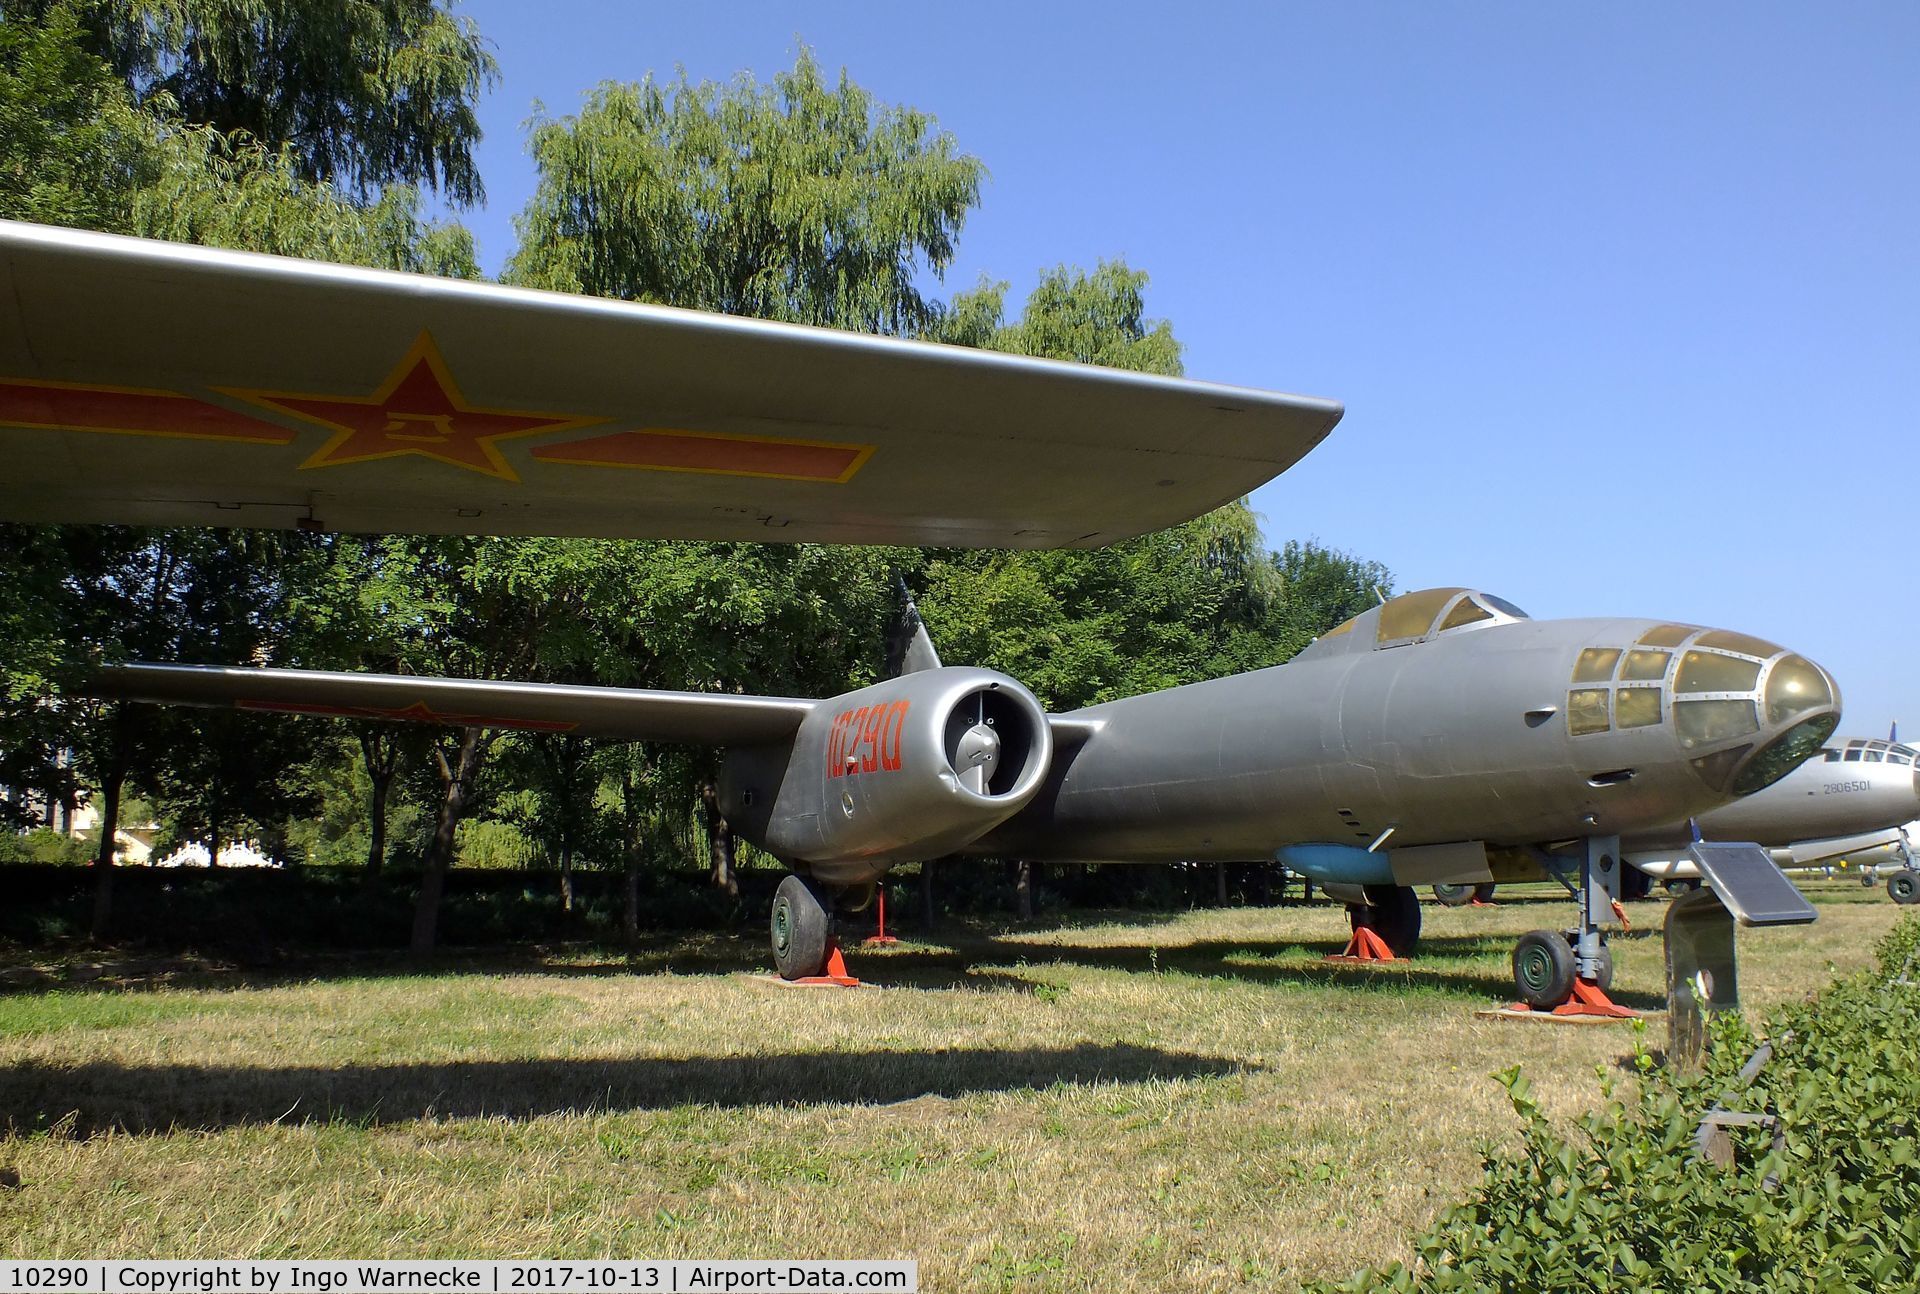 10290, Harbin H-5 C/N 54120, Harbin H-5 (chinese version of Il-28) BEAGLE at the China Aviation Museum Datangshan